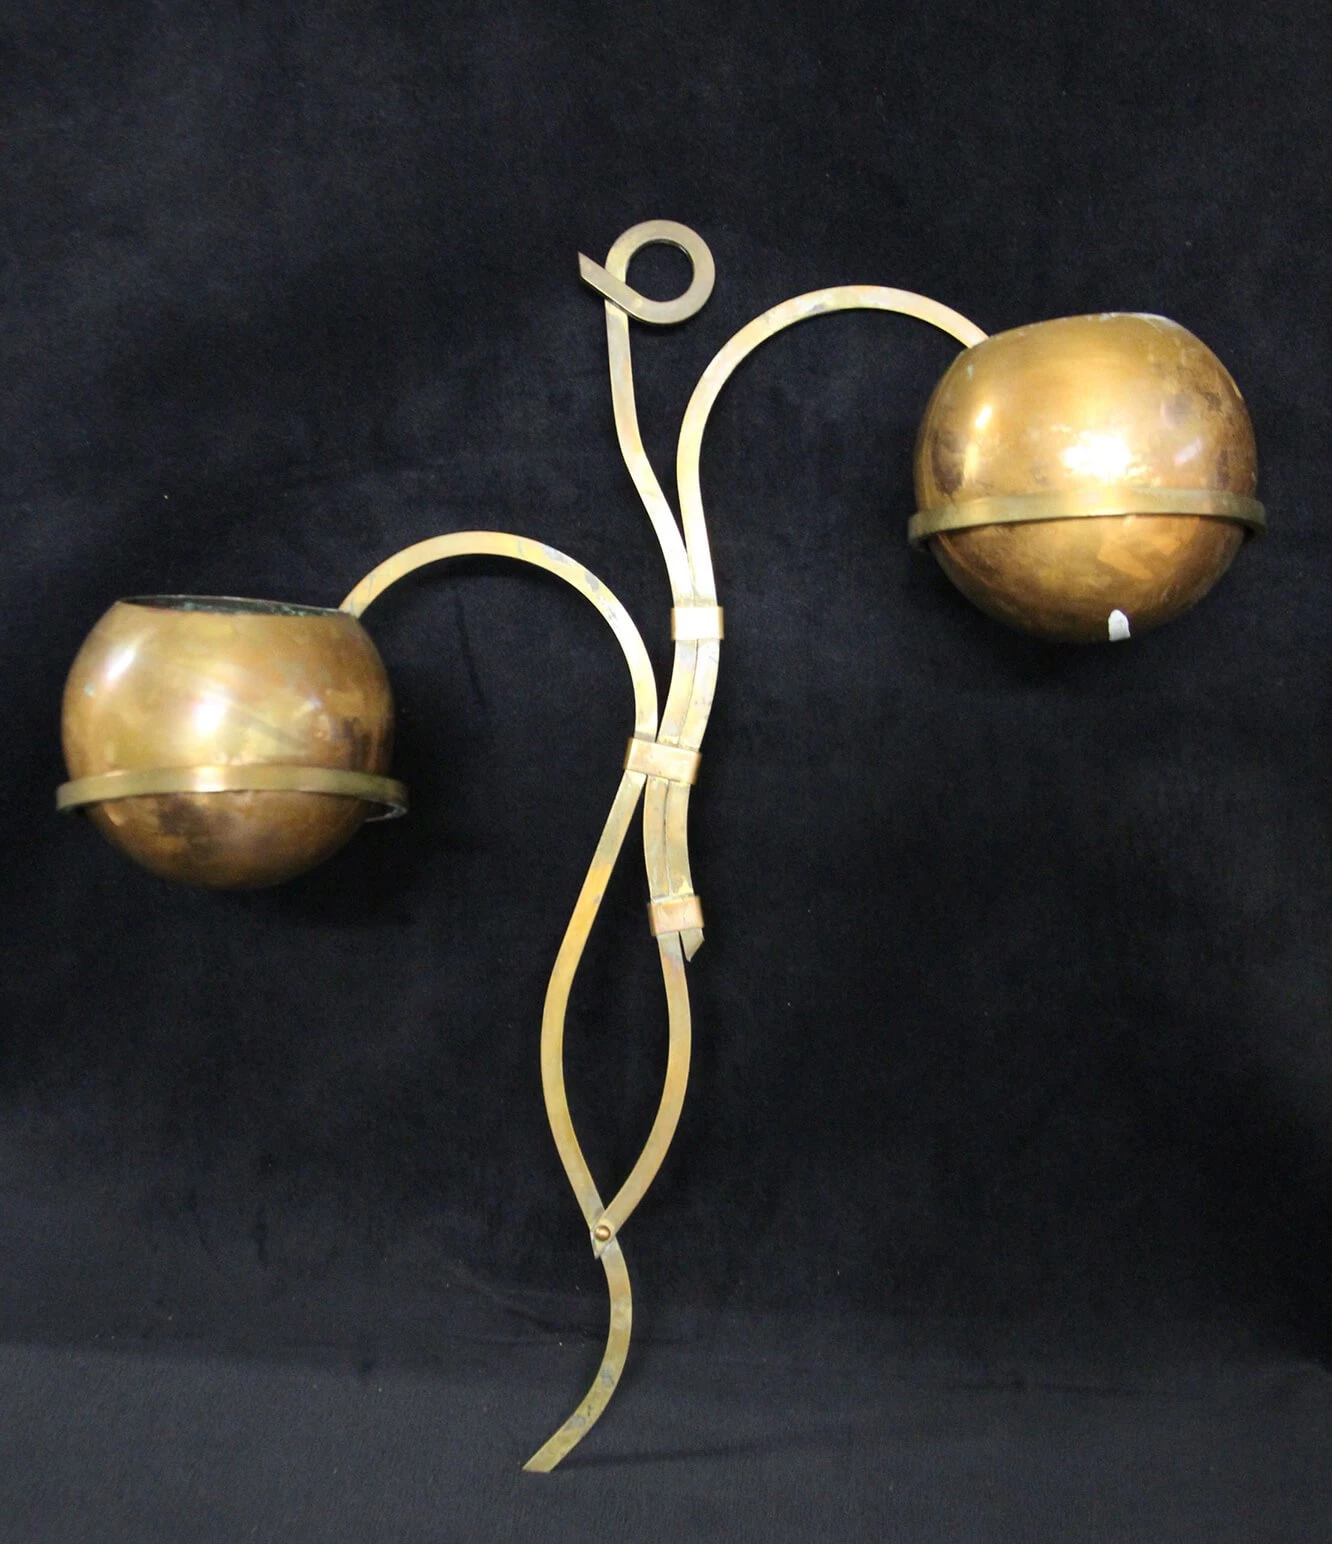 Photo of a decorative wall planter, with copper spheres on a plant-stem inspired rod